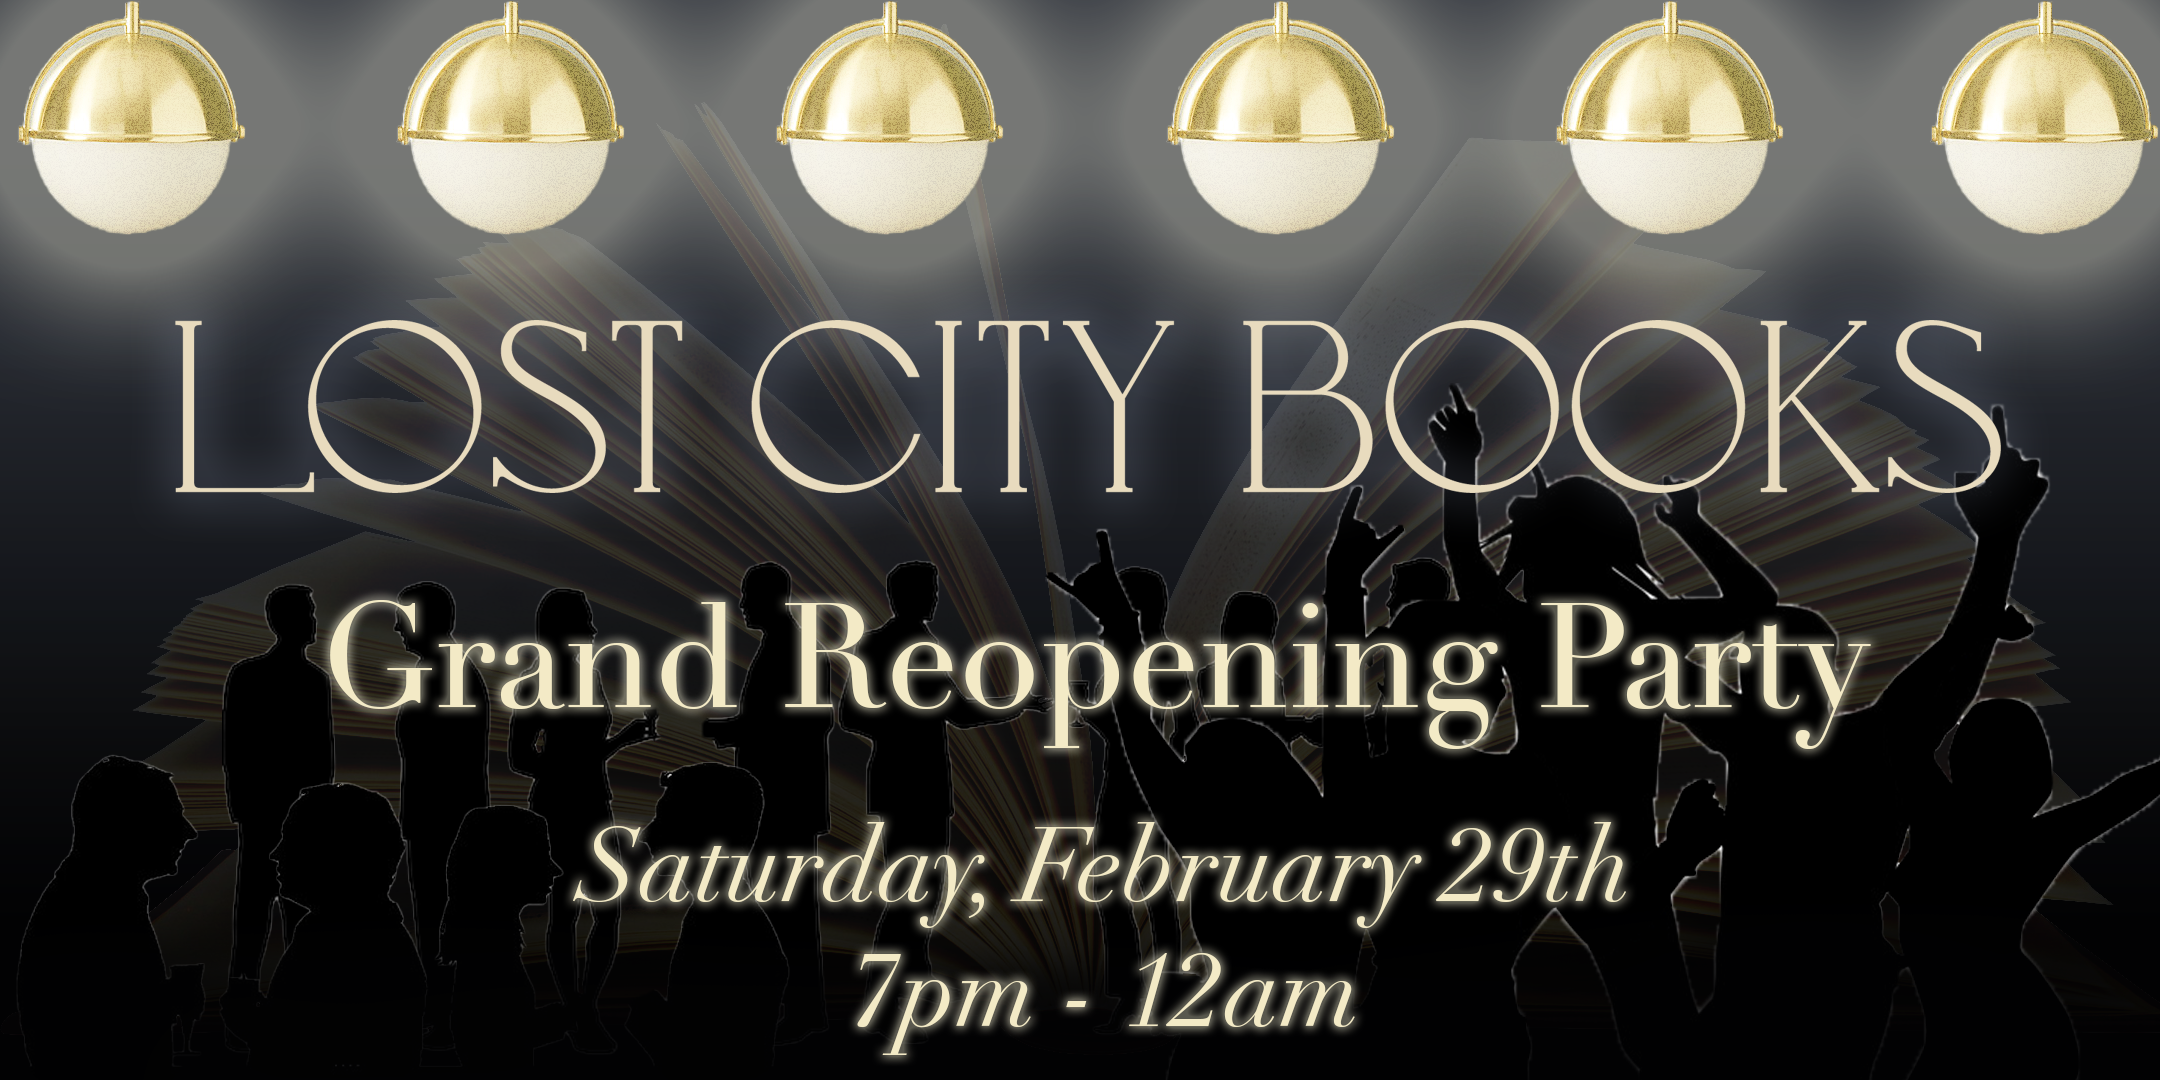 Lost City Books Grand Reopening Party